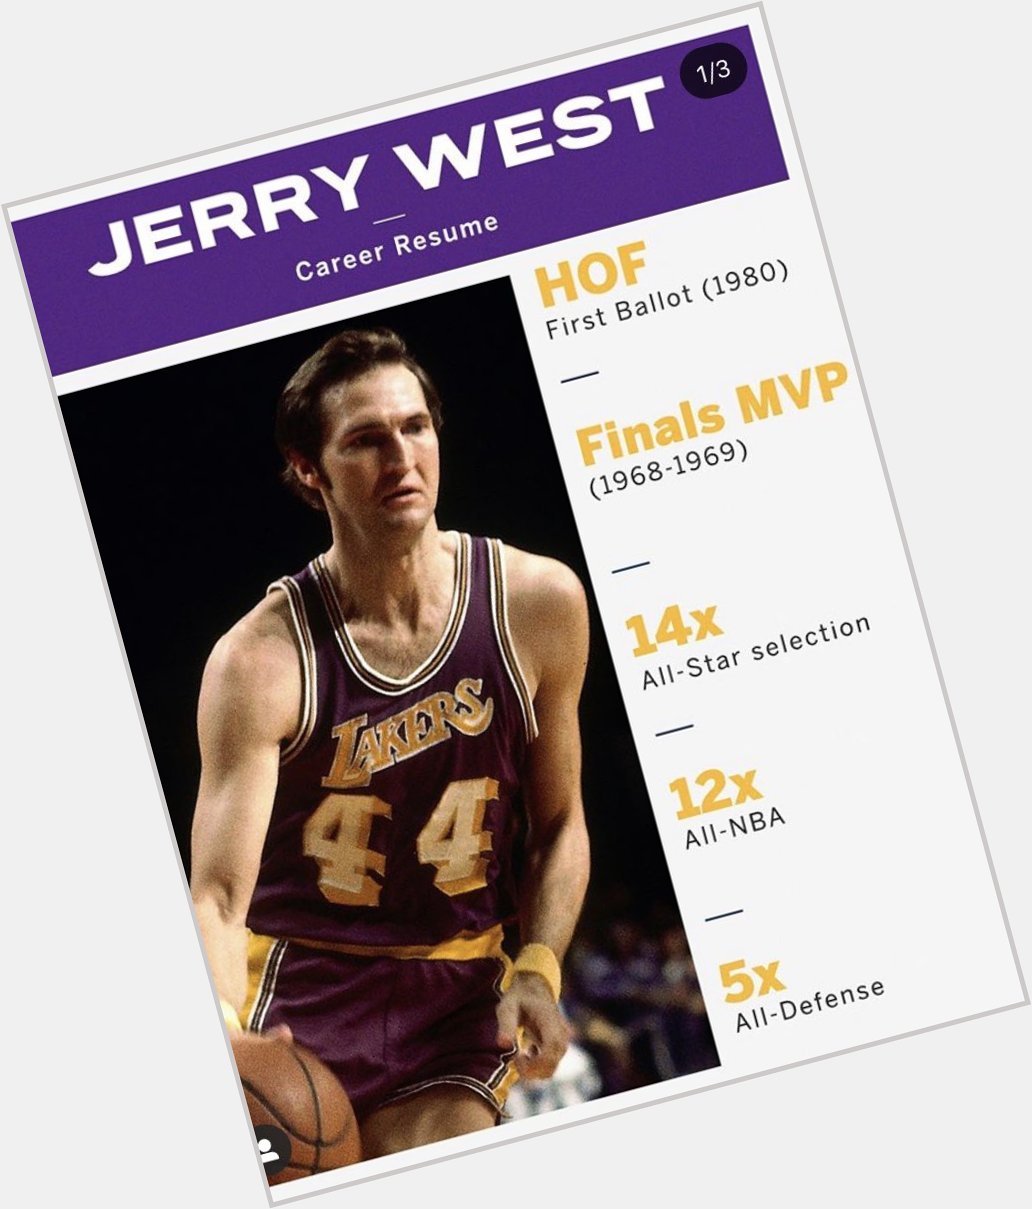 Jerry West turns 82 today. Happy birthday to the logo 